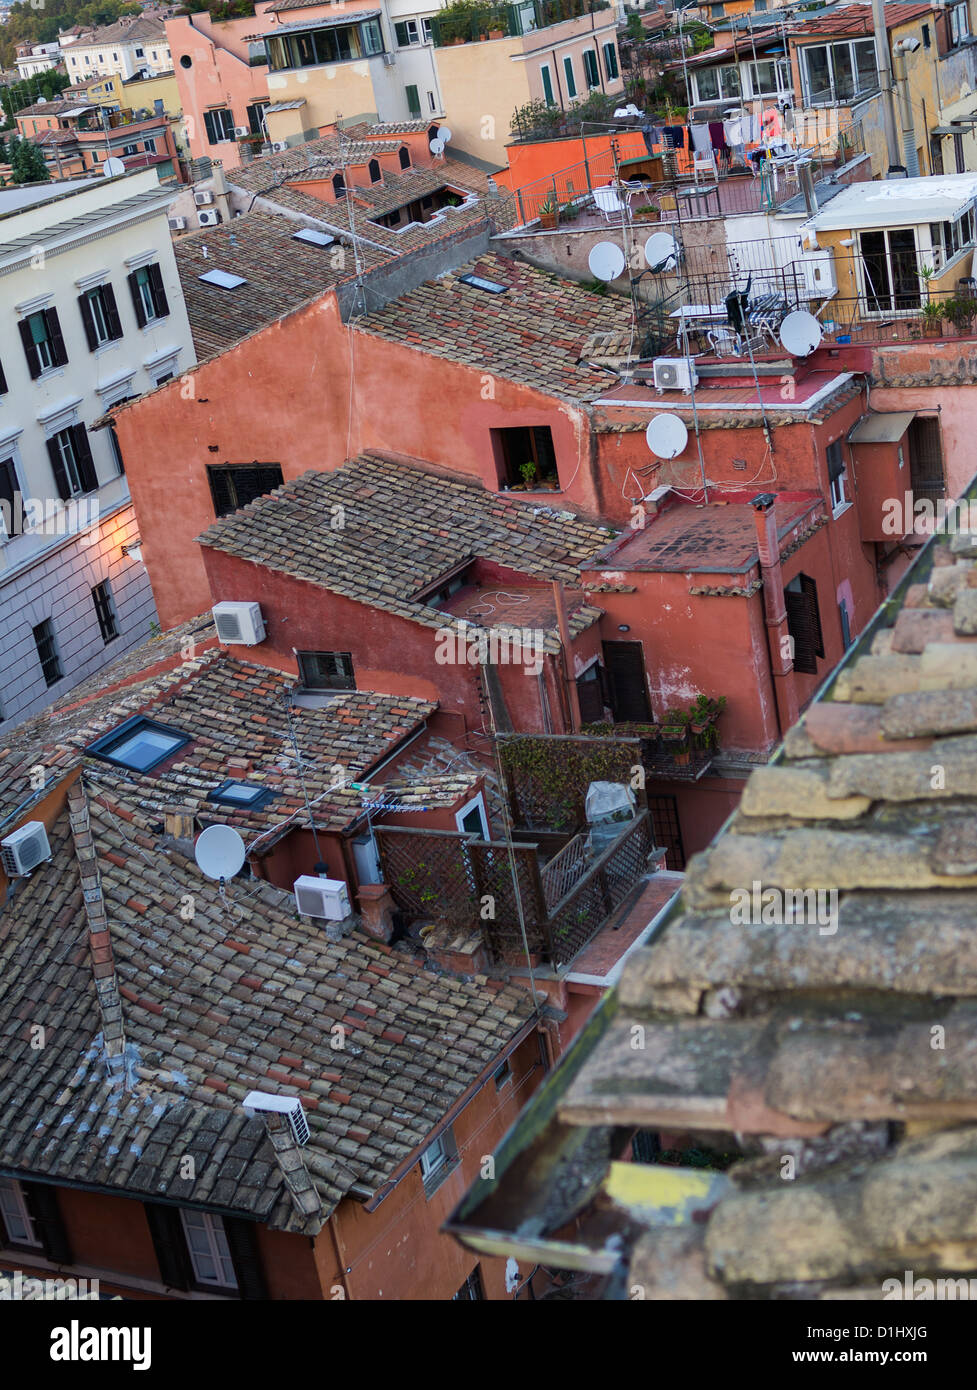 Old and new come together in this aeriel view of houses in Rome. Stock Photo